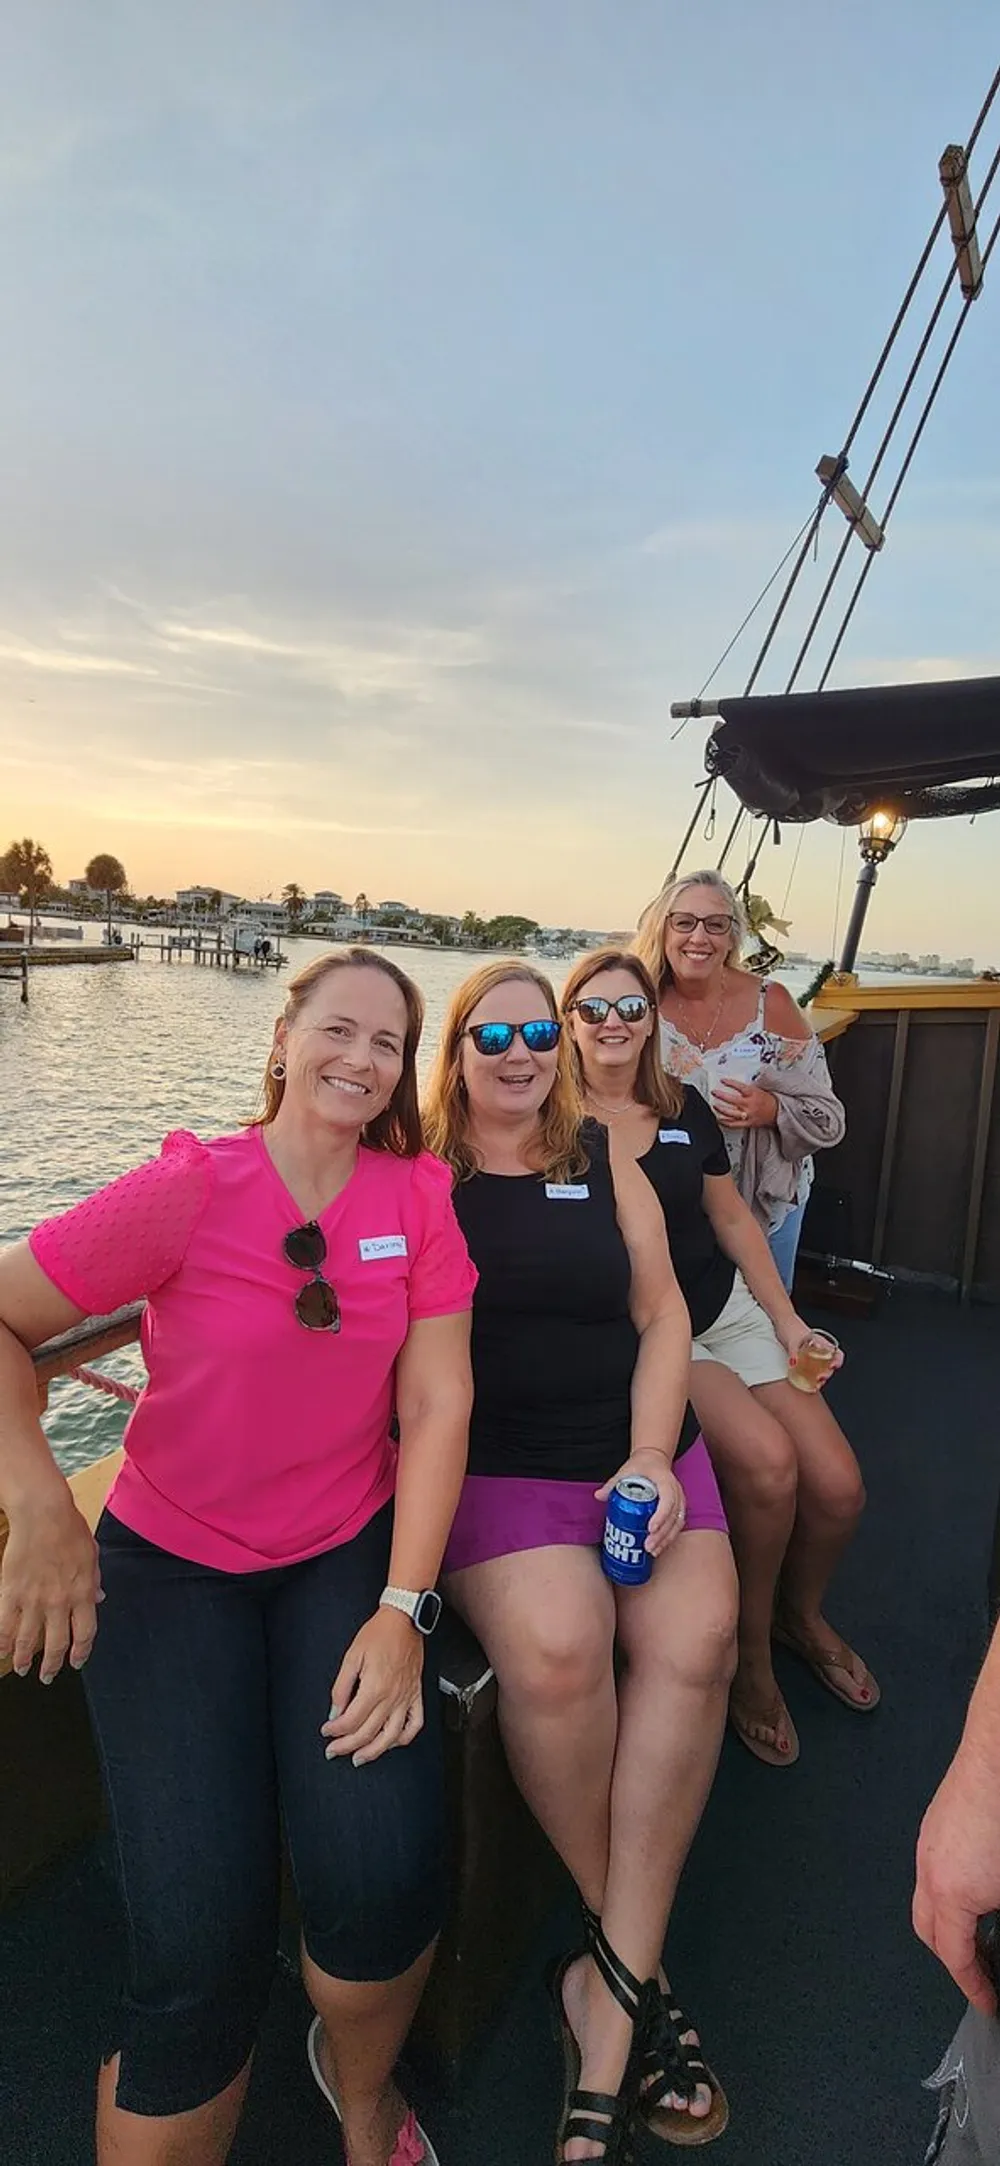 Four people are smiling for a photo while enjoying a boat ride during the sunset with calm waters and docks visible in the background